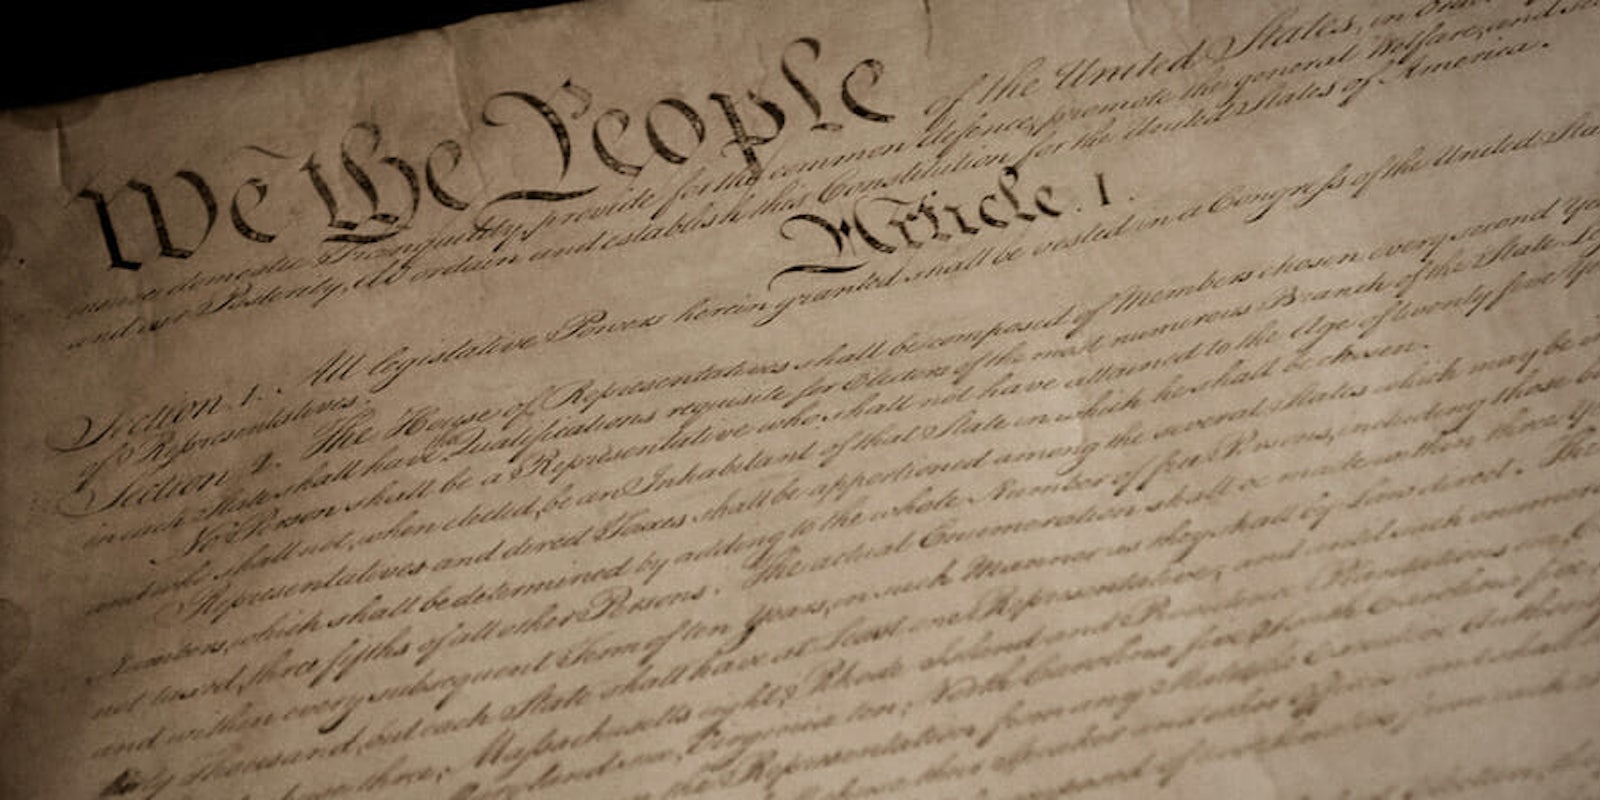 Facebook apologized for flagging and removing a passage from the Declaration of Independence.